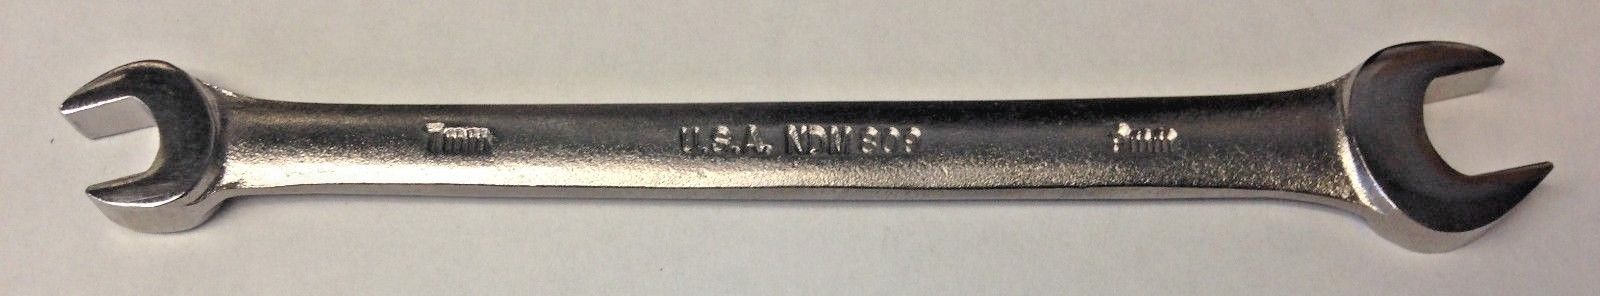 Napa Tools NDM809 7mm x 9mm Satin Finish Open End Wrench USA